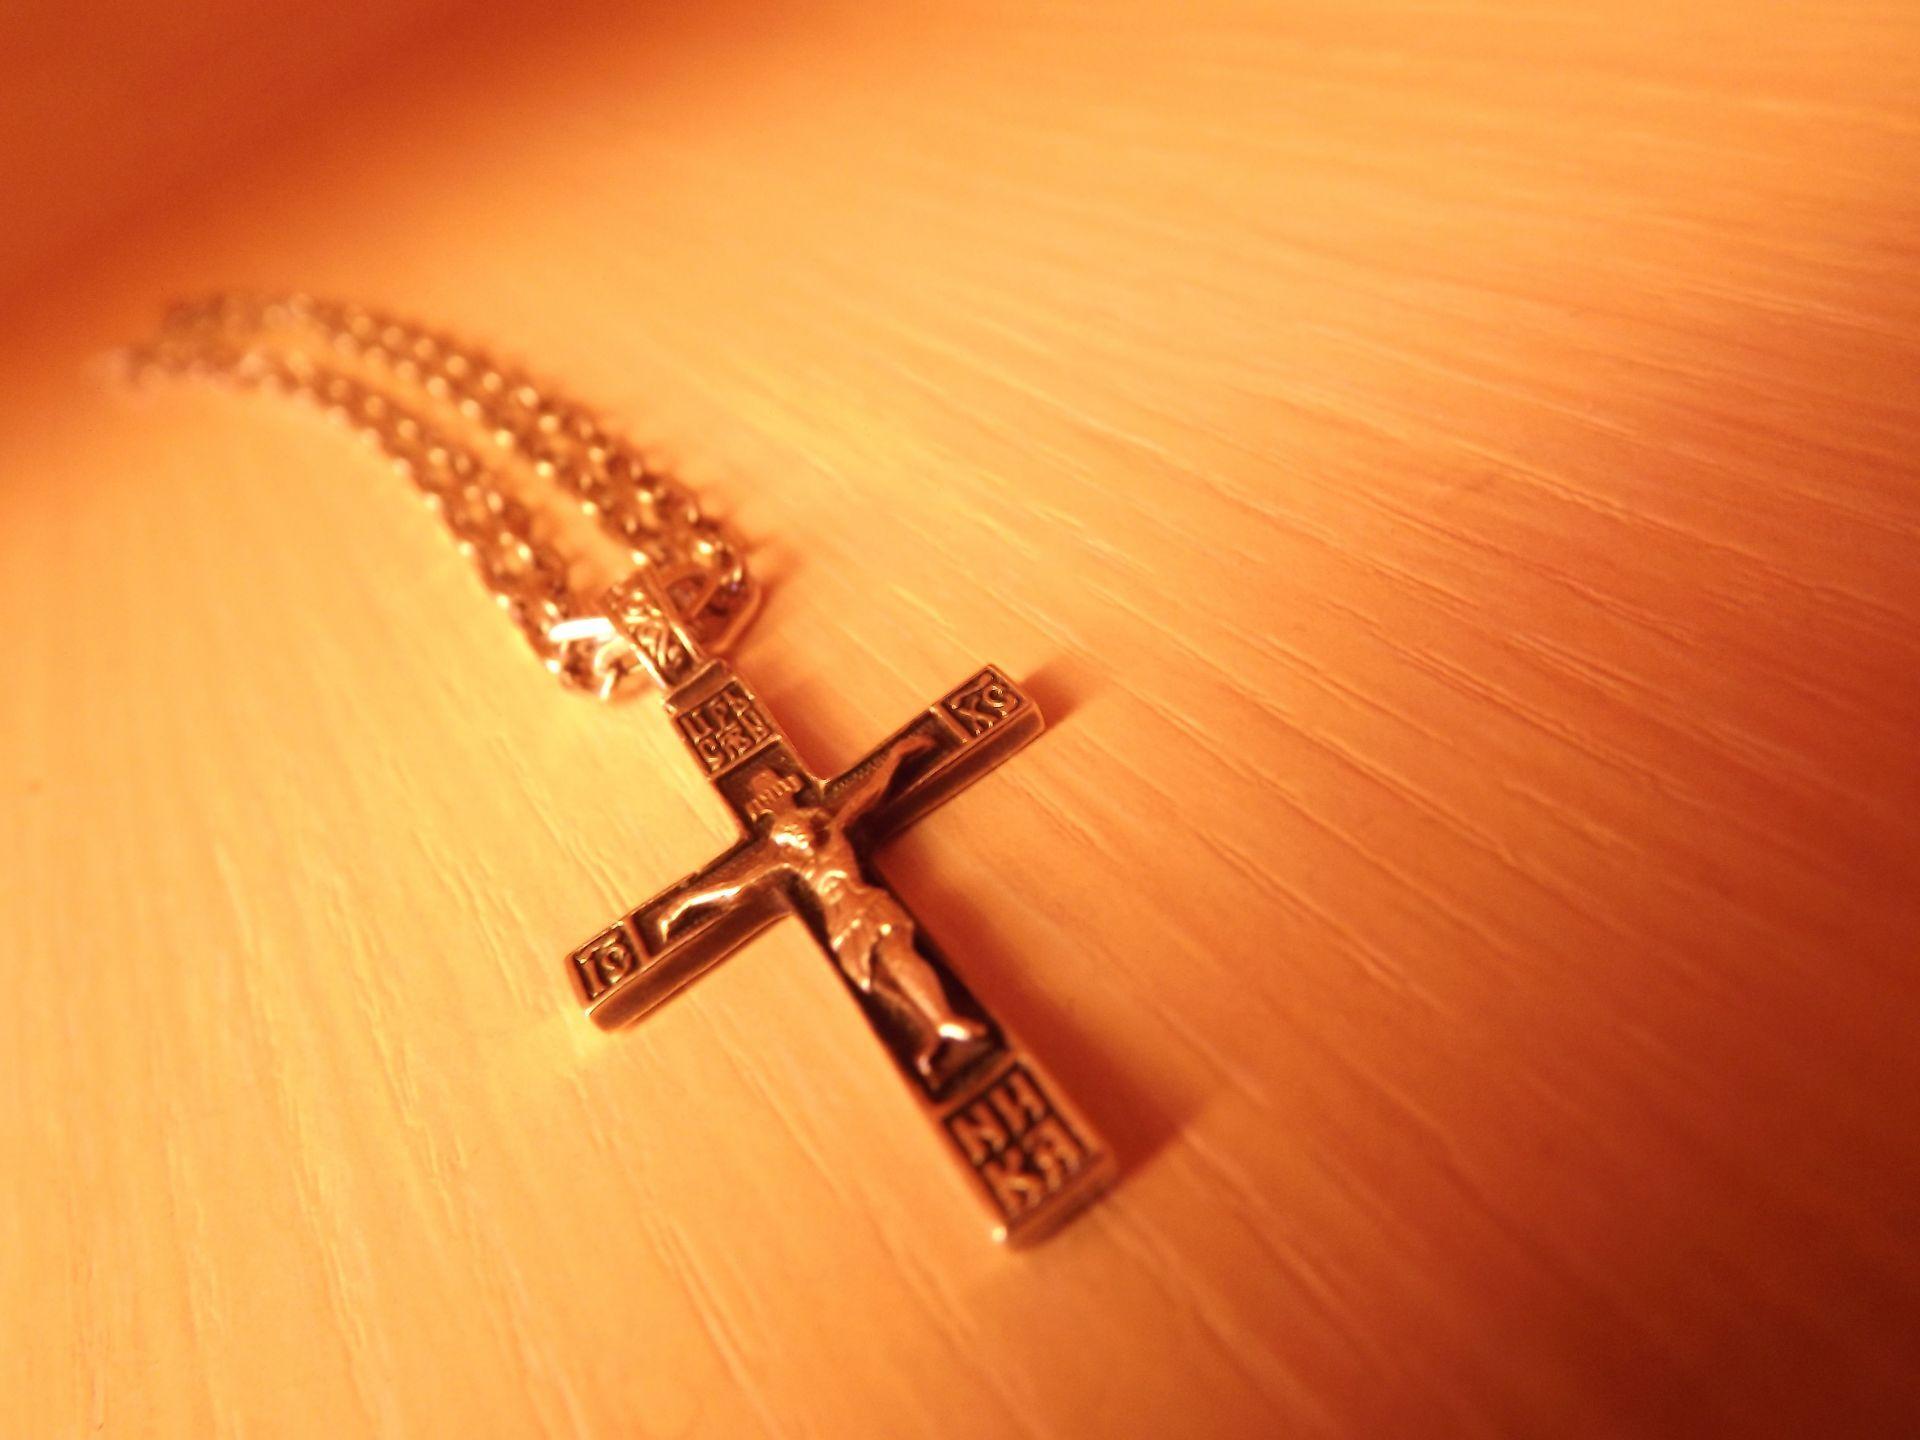 Cross crucifix faith macro. Android wallpaper for free